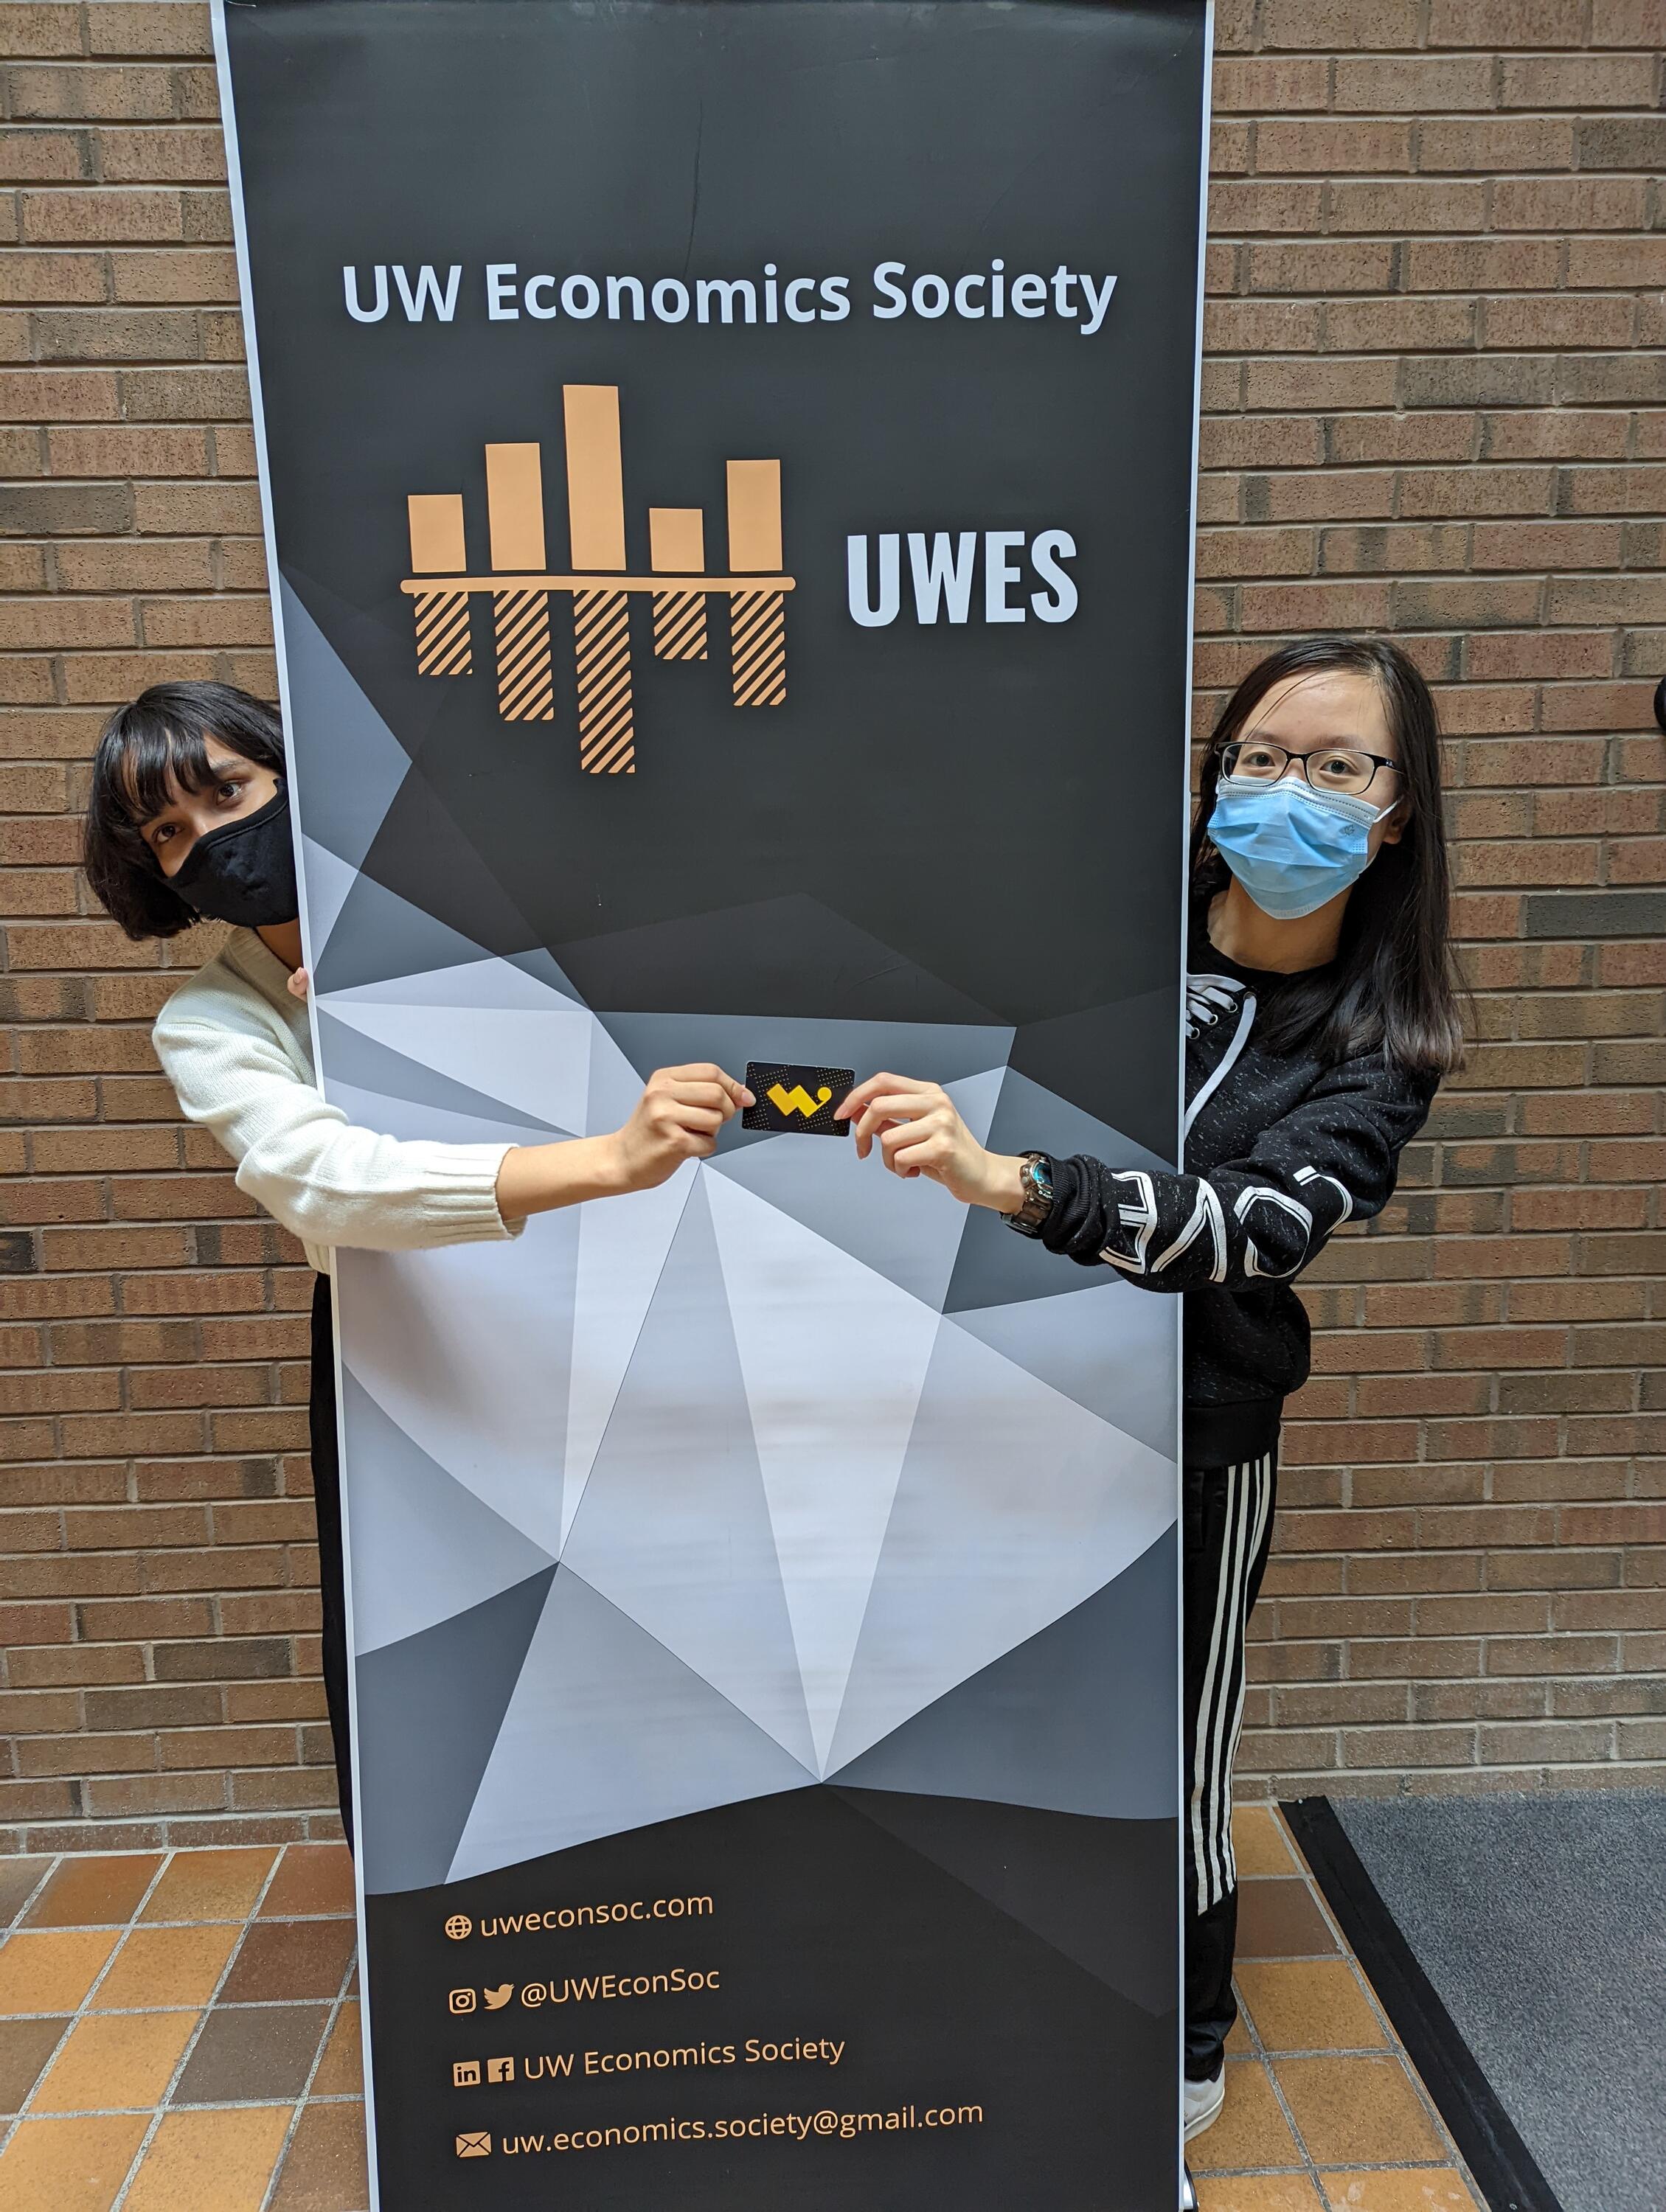 Our Student Outreach Coordinator for Fall 2021, Yana Tiwari, presents Vicky Chen with a W Store gift card in recognition of her enthusiastic participation as a mentor to 2A Economics students